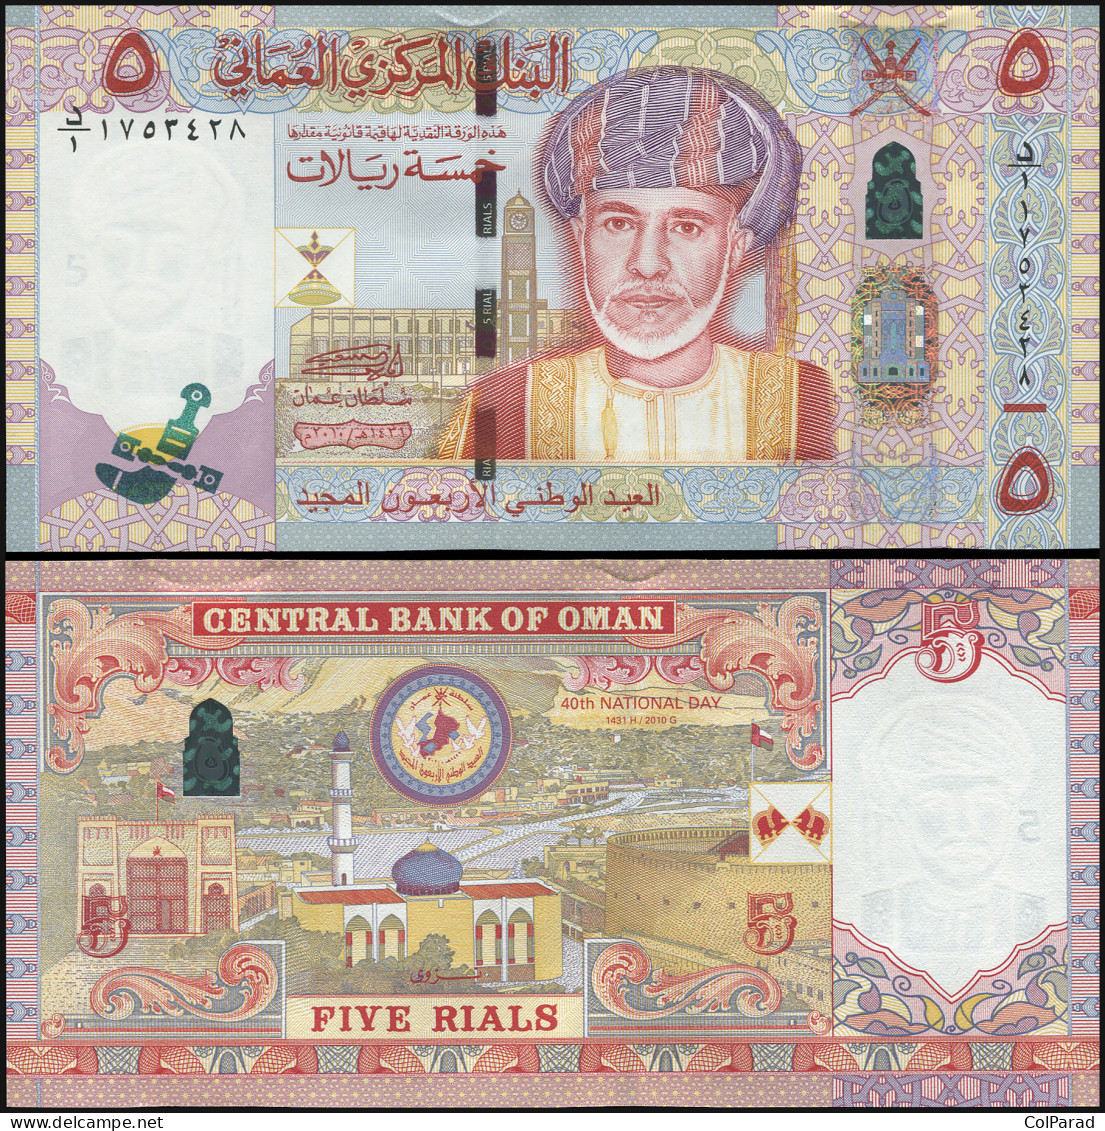 OMAN 5 RIALS - 2010 (2012) - Paper Unc - P.44a Banknote - 40th National Day - Oman